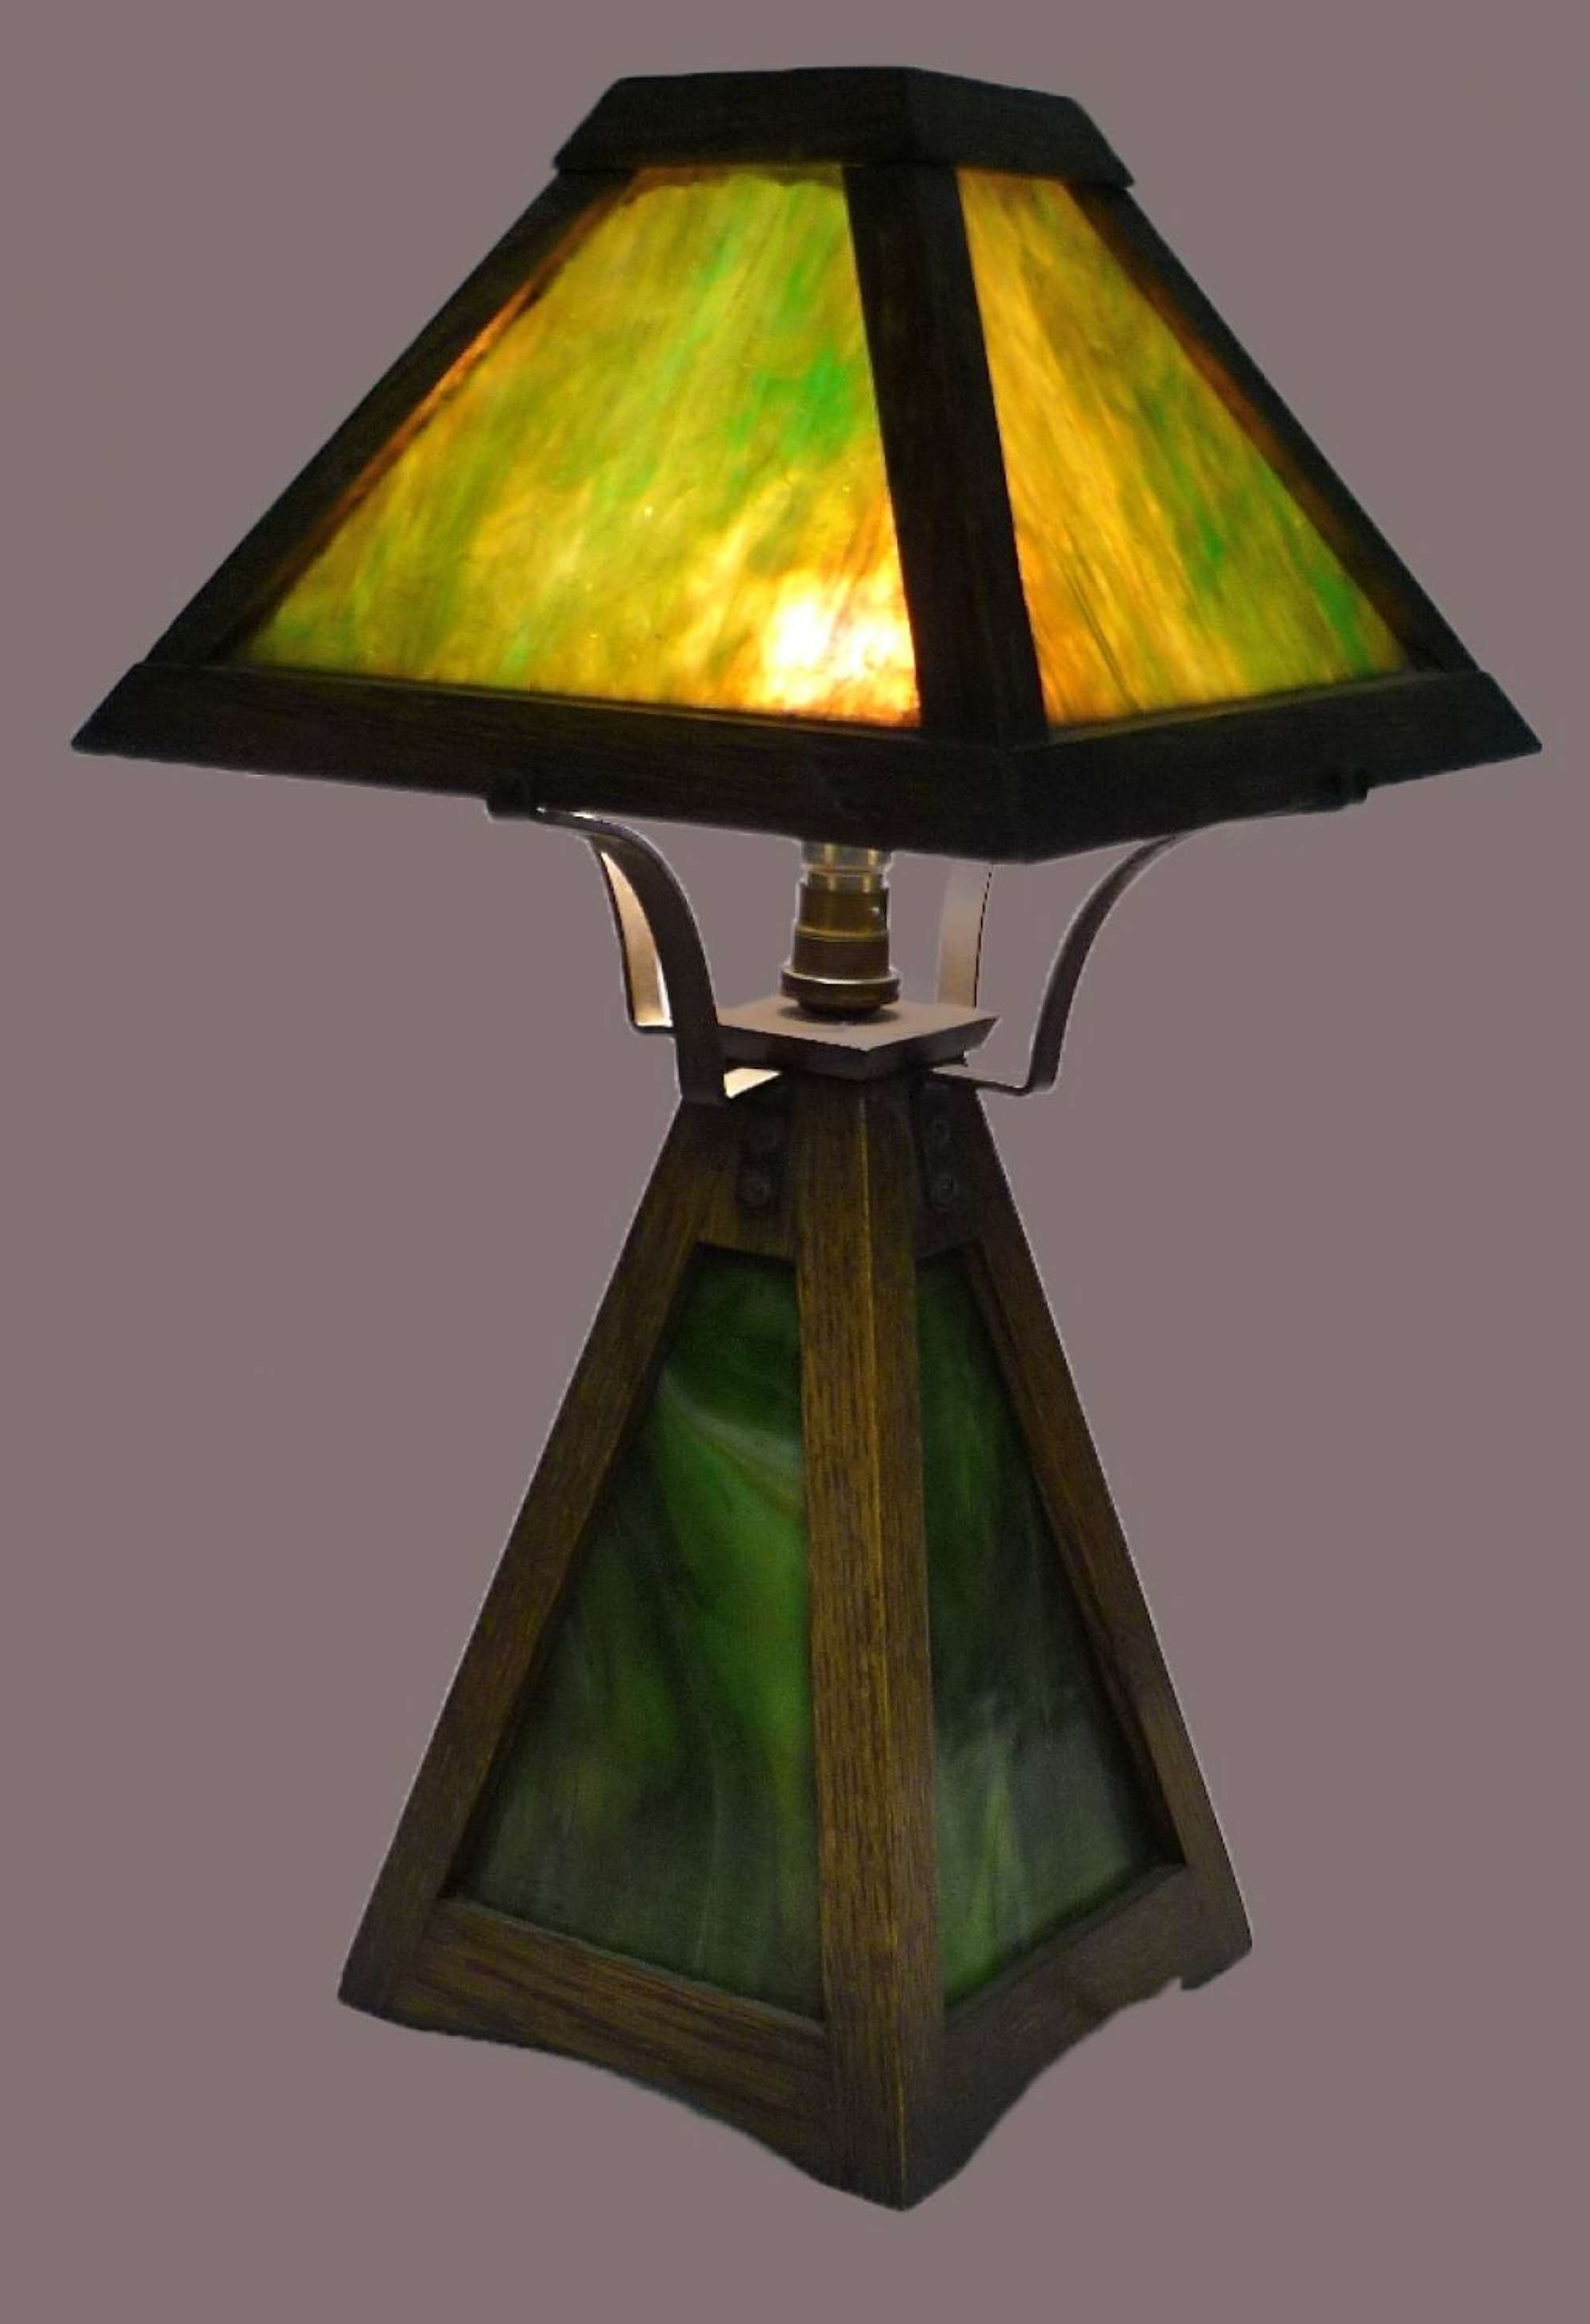 An American Mission period lamp